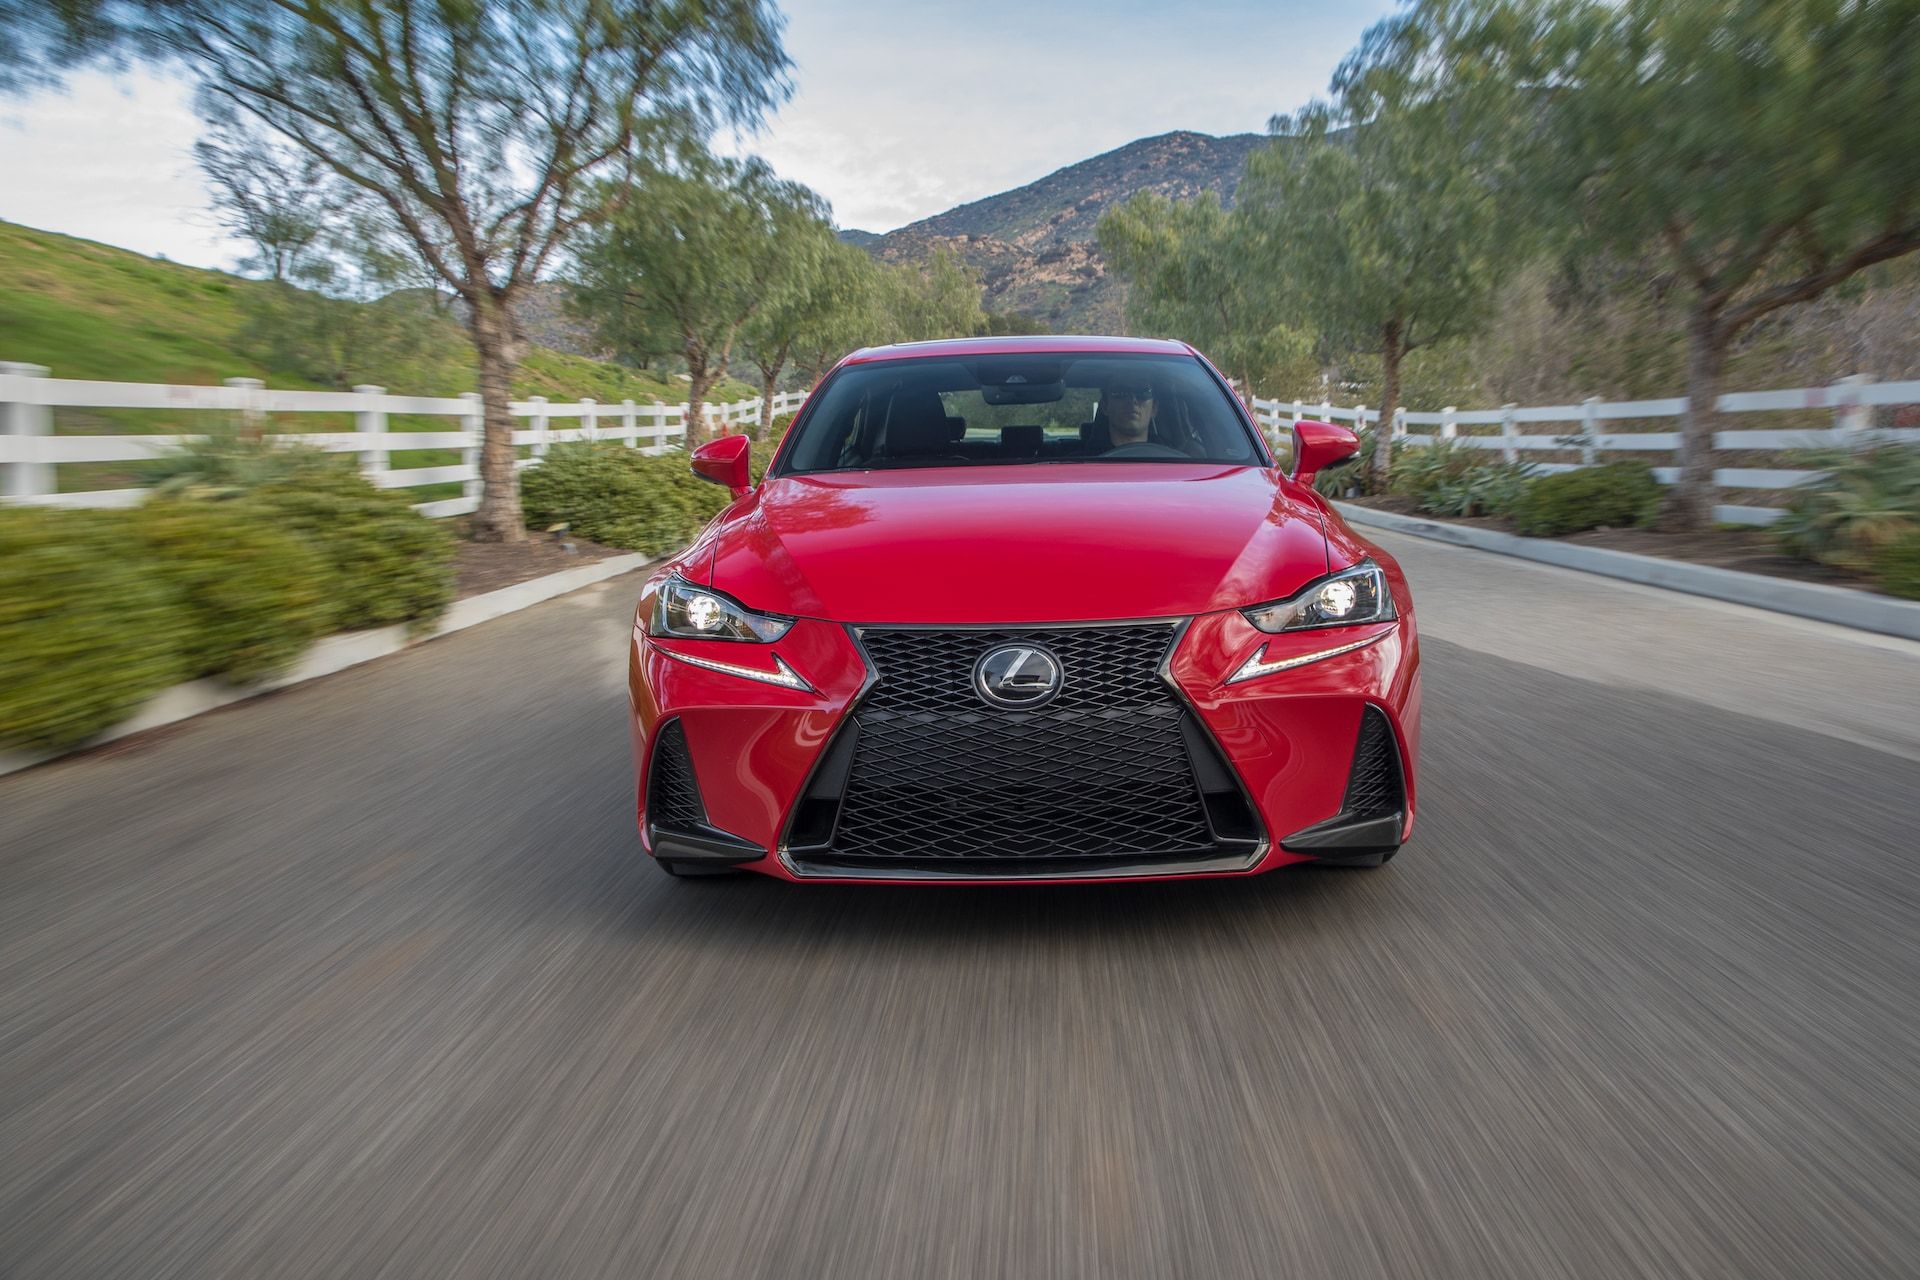 2017 Lexus Is 200t Front End In Motion (View 49 of 51)